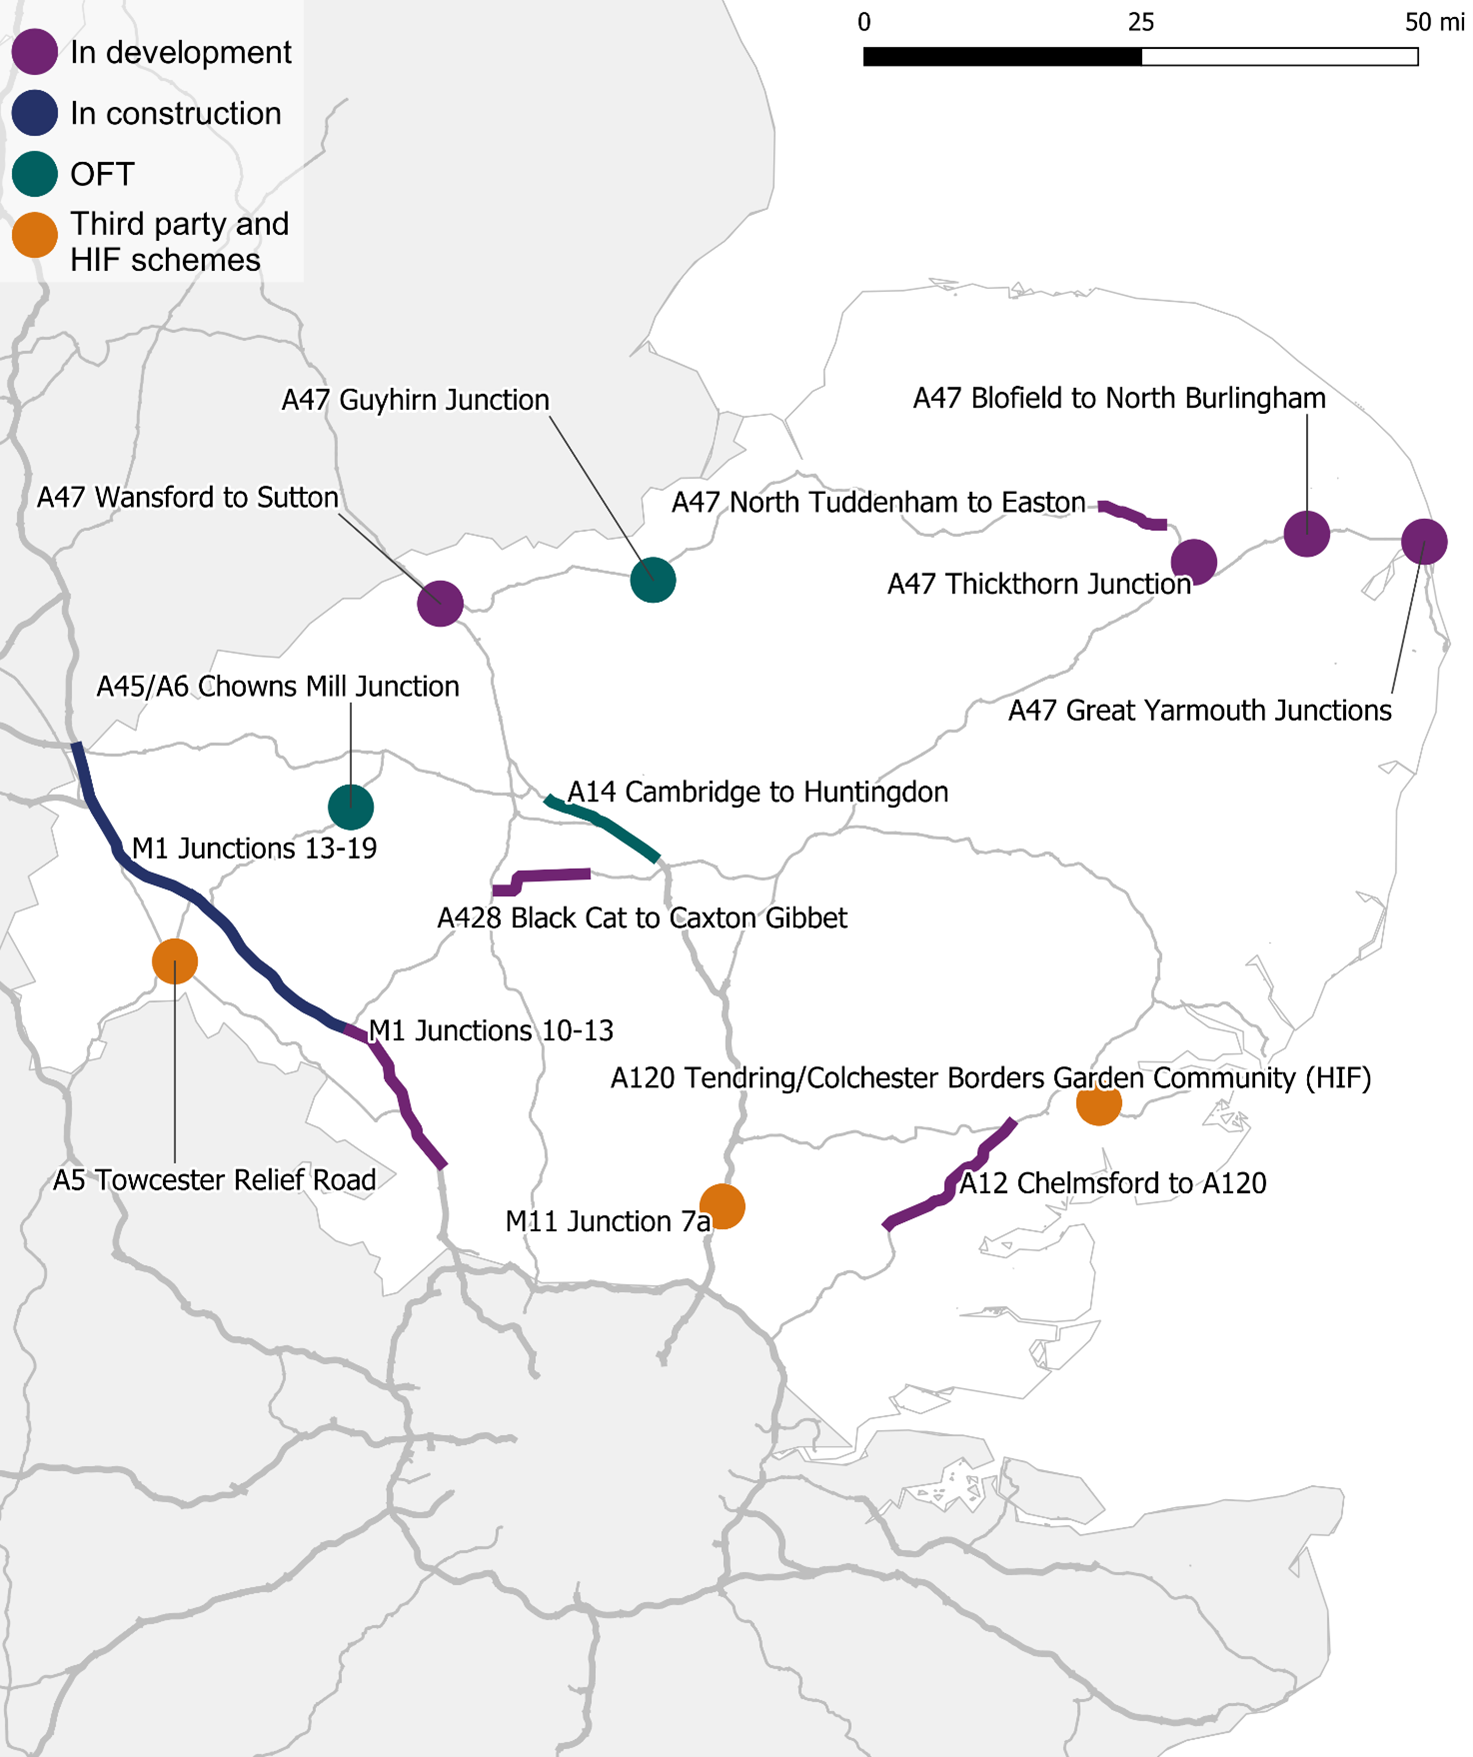 This map and key show the status of schemes in the  East.  A14 Cambridge to Huntingdon is in the complex infrastructure programme, it is open to traffic, it met its start and opening commitments; A47 Wansford to Sutton is in the regional investment programme, it is in development, it is on target to meet start of work commitment and open for traffic commitment; RIP A 47 Great Yarmouth Junctions is in the regional investment programme, it is in development, it is on target to meet its start work and open for traffic commitments;  A47 Guyhirn junction is in the regional investment programme, it is open to traffic, it met its  start and open for traffic commitments; A47 North Tuddenham is in the regional investment programme, it is in development, it is on target to meet its start and open for traffic commitments; A47 Thickthorn junction is in the regional investment programme, it is in development, it is on target to meet its start and open for traffic commitments; A47 Blofield to North Burlingham is in the regional investment programme, it is in development, it missed its start of work commitment, it is on target to meet its open for traffic commitment; A12 Chelmsford to A120 is in the complex infrastructure programme, it is in development, it is at risk of meeting its start of work commitment, it is on target to meet its open for traffic commitment; M1 J10 to 13 retrofit upgrade DHS to ALR is in the smart motorway programme, it is in development, its start of work and open for traffic commitments have been paused.